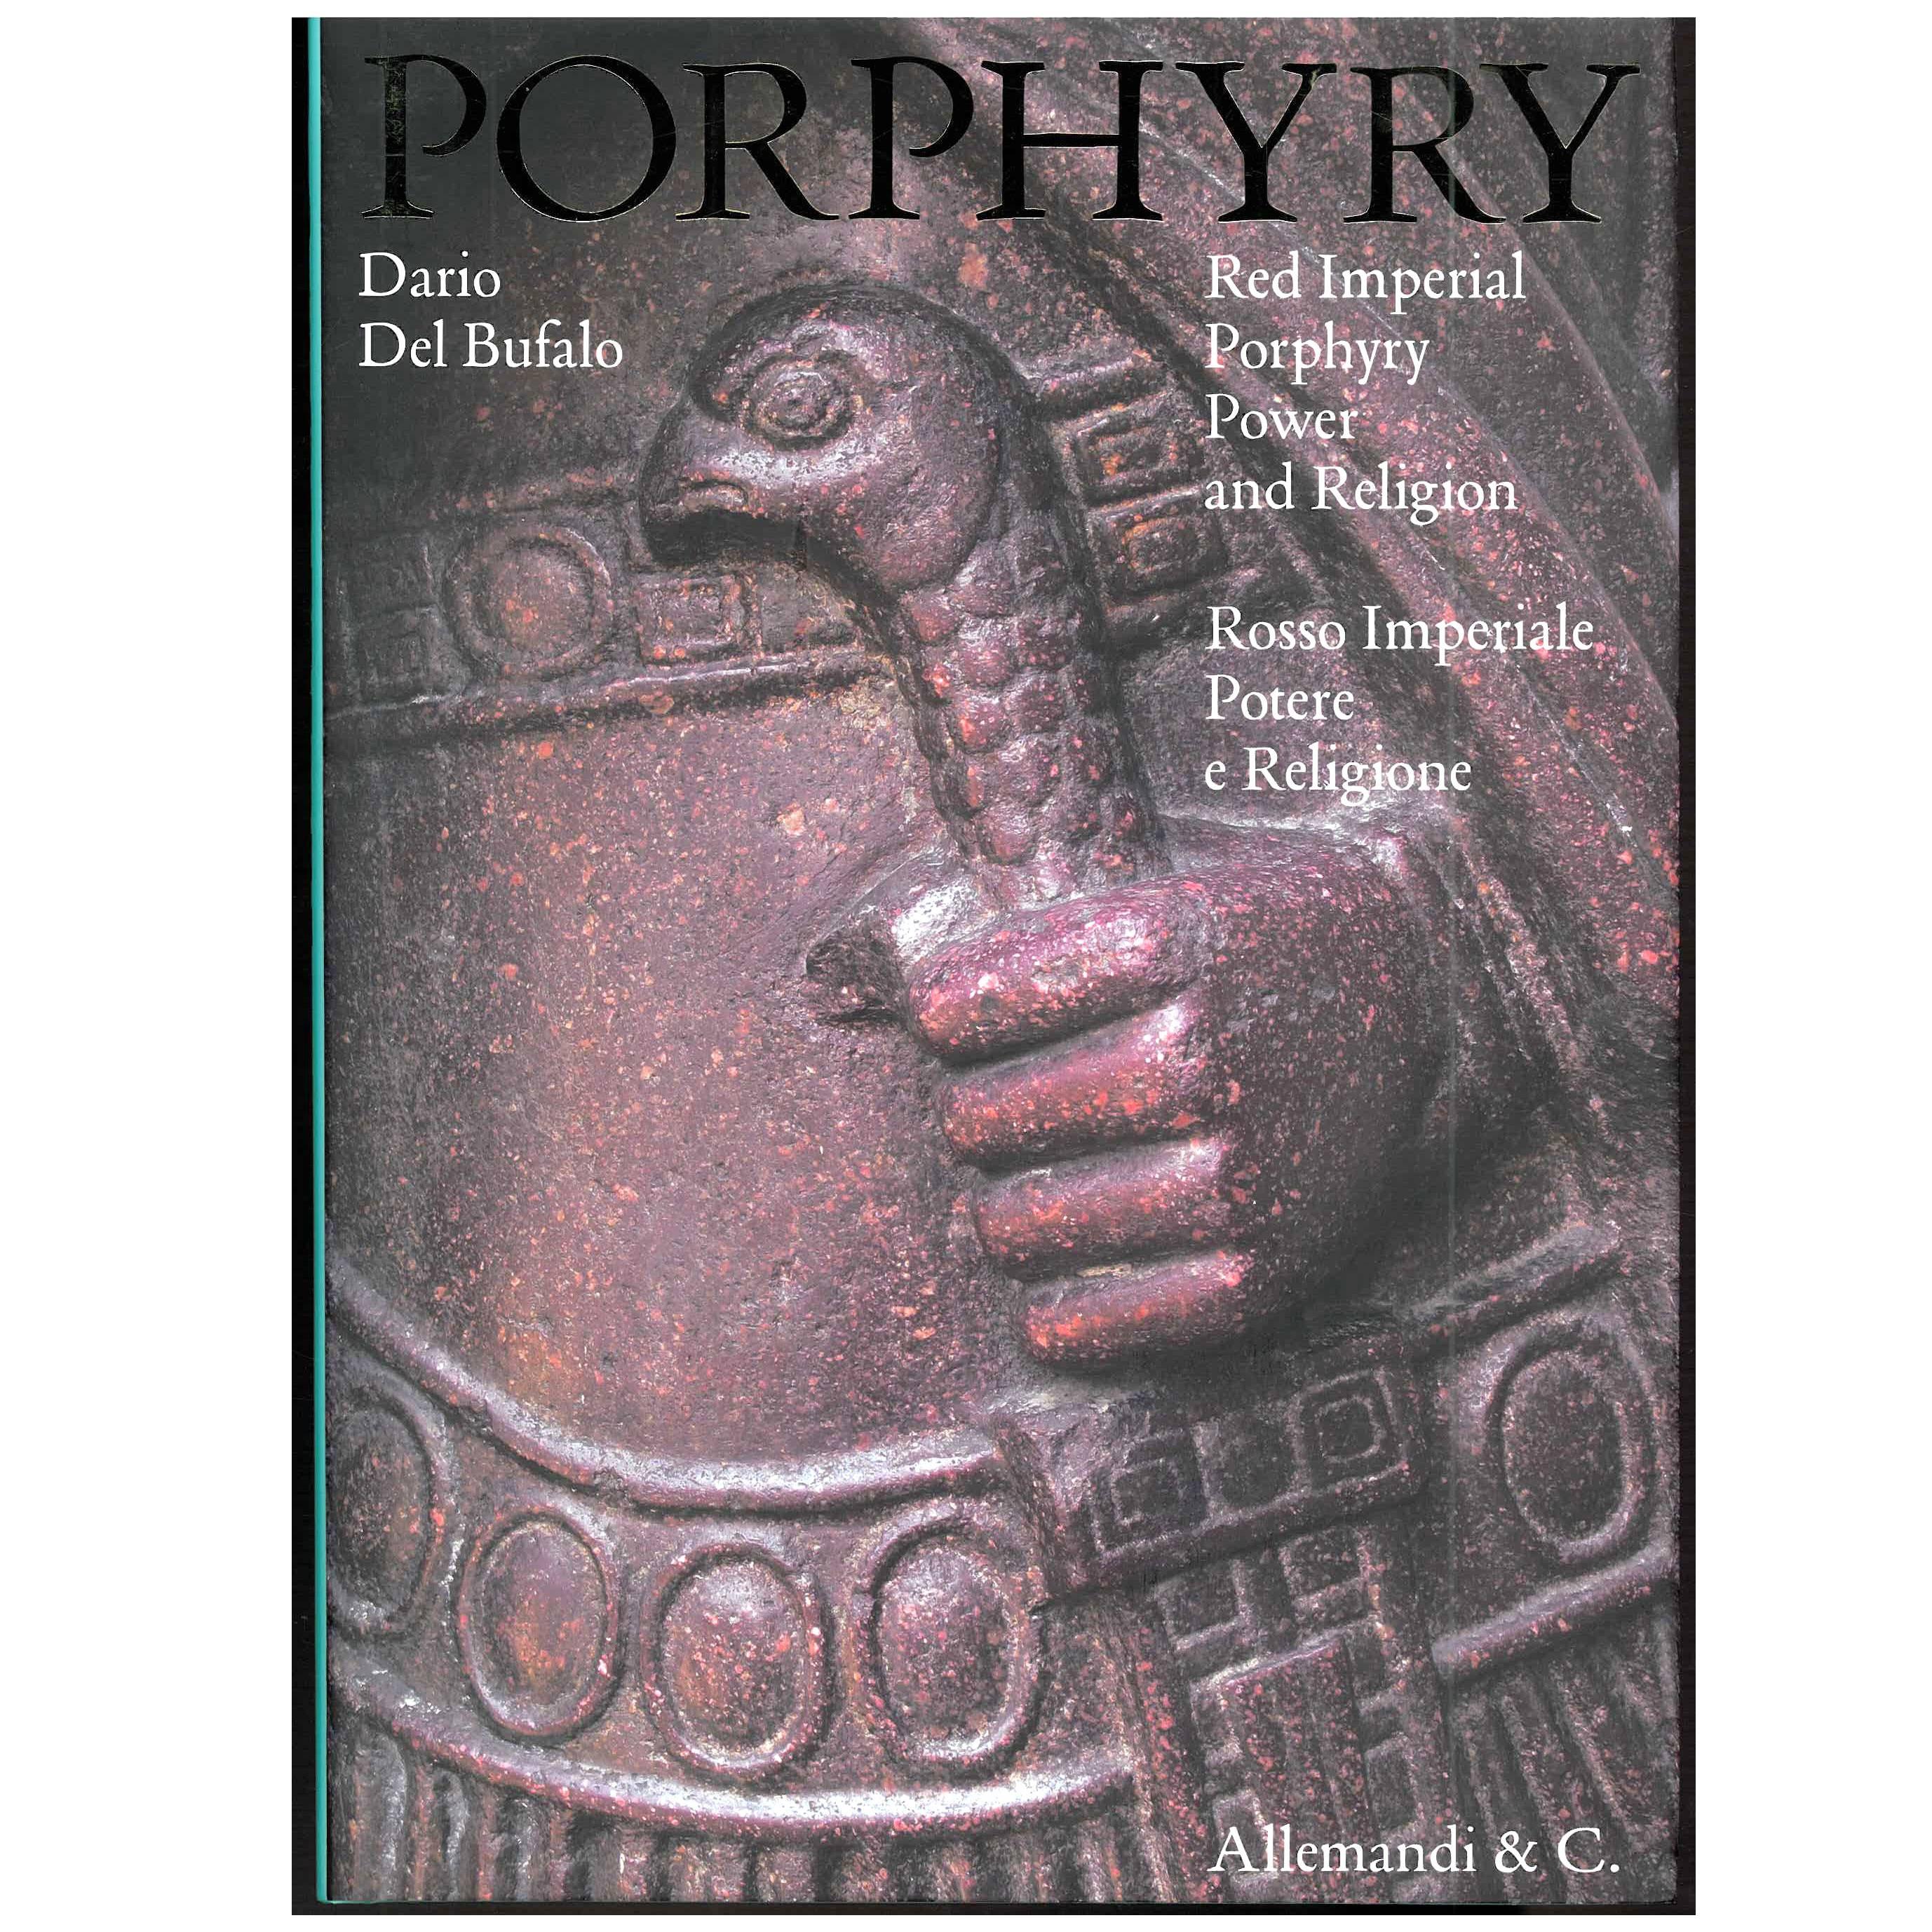 Porphyry: Red Imperial Porphyry Power and religion (Livre)